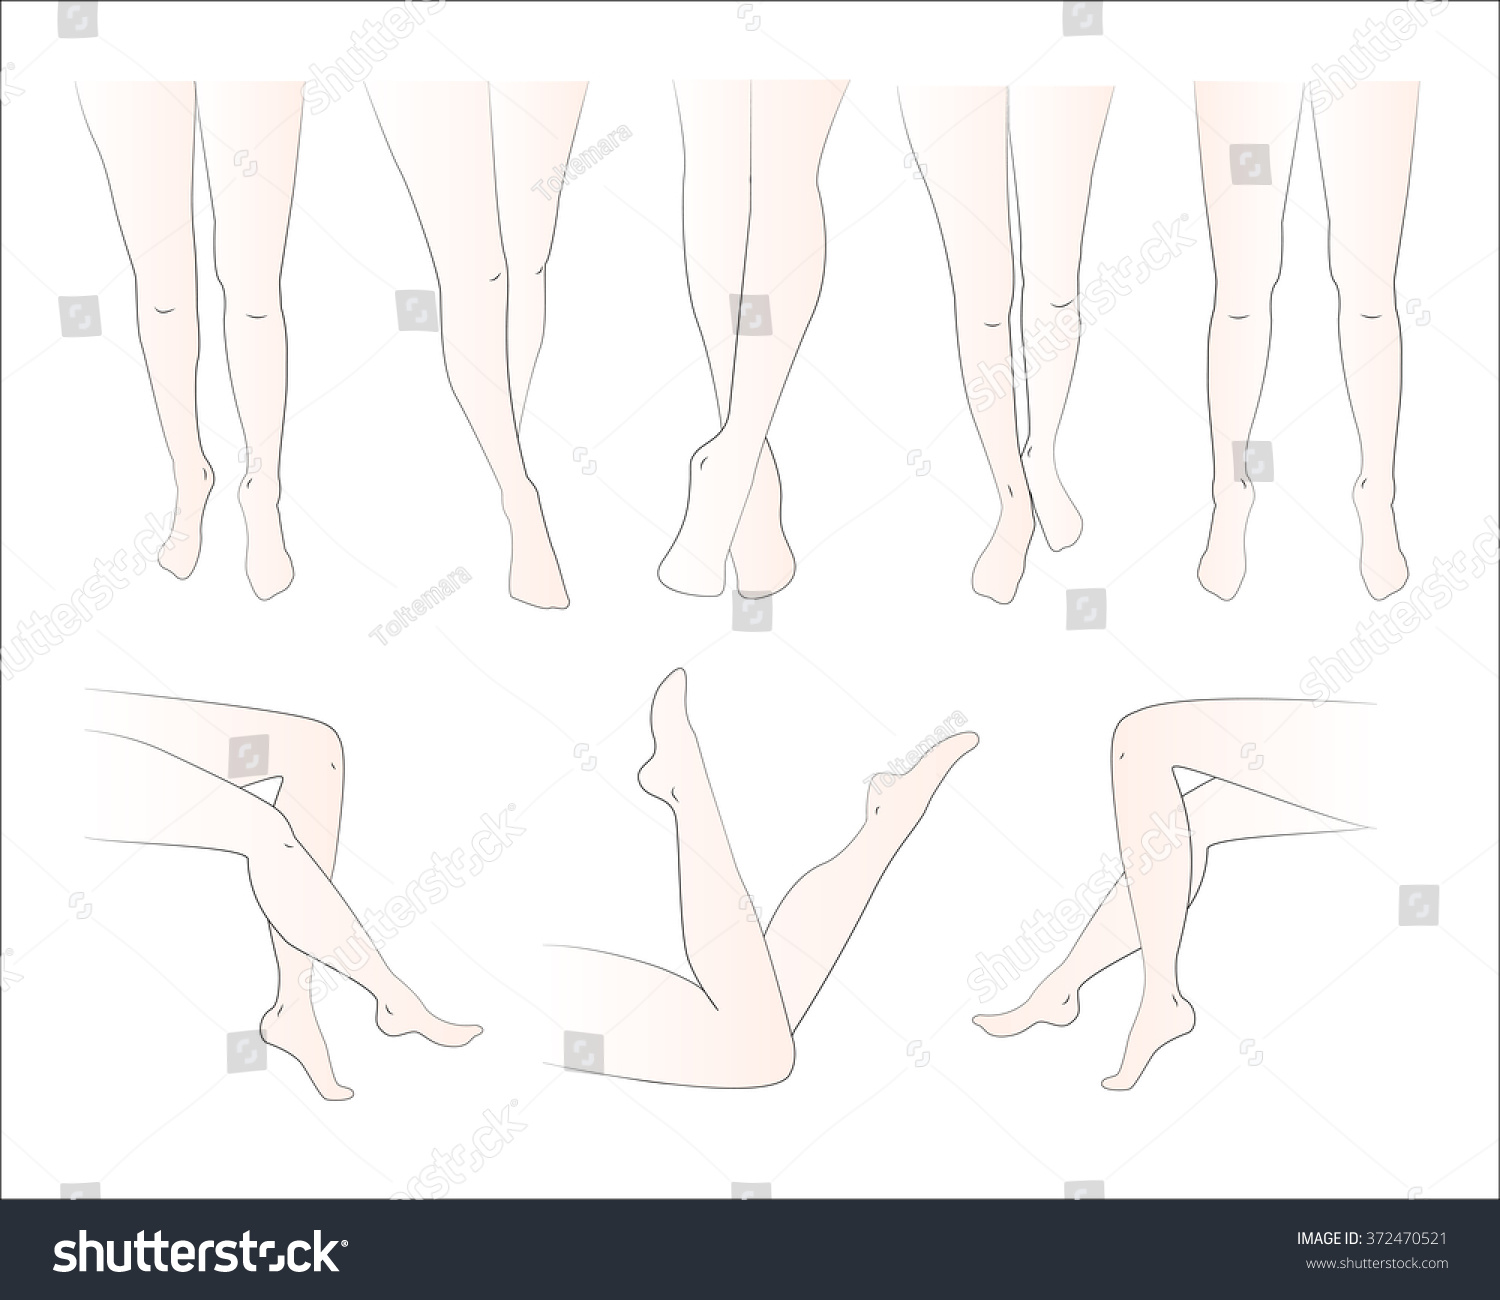 Woman Legs In Different Poses Set Elegant Lying Royalty Free Stock Vector 372470521 Avopix Com Available with seamless streaming across your devices. avopix com